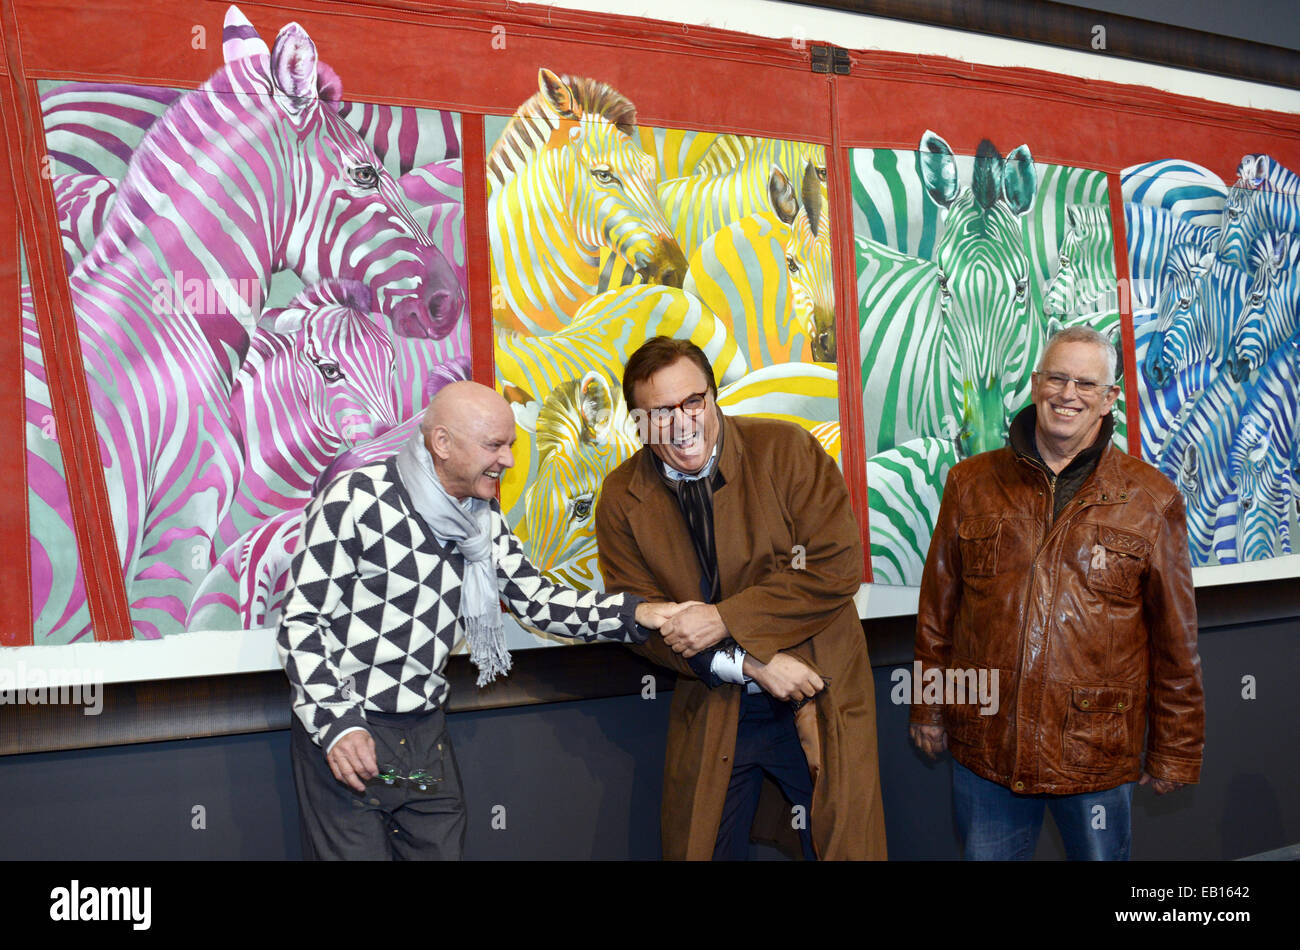 Rust, Germany. 22nd Nov, 2014. Swiss painter and former actor and clown Rolf Knie (L) kids around with the director of Europa Park, Roland Mack (C), and Charlie Chaplin's son, Eugene Chaplin (R) in front of some of his paintings in the exhibition 'Rolf Knie - Circus' in Europa Park in Rust, Germany, 22 November 2014. The exhibition, which showcases his life's work, can be seen until 11 January 2015. Photo: PATRICK SEEGER/dpa/Alamy Live News Stock Photo